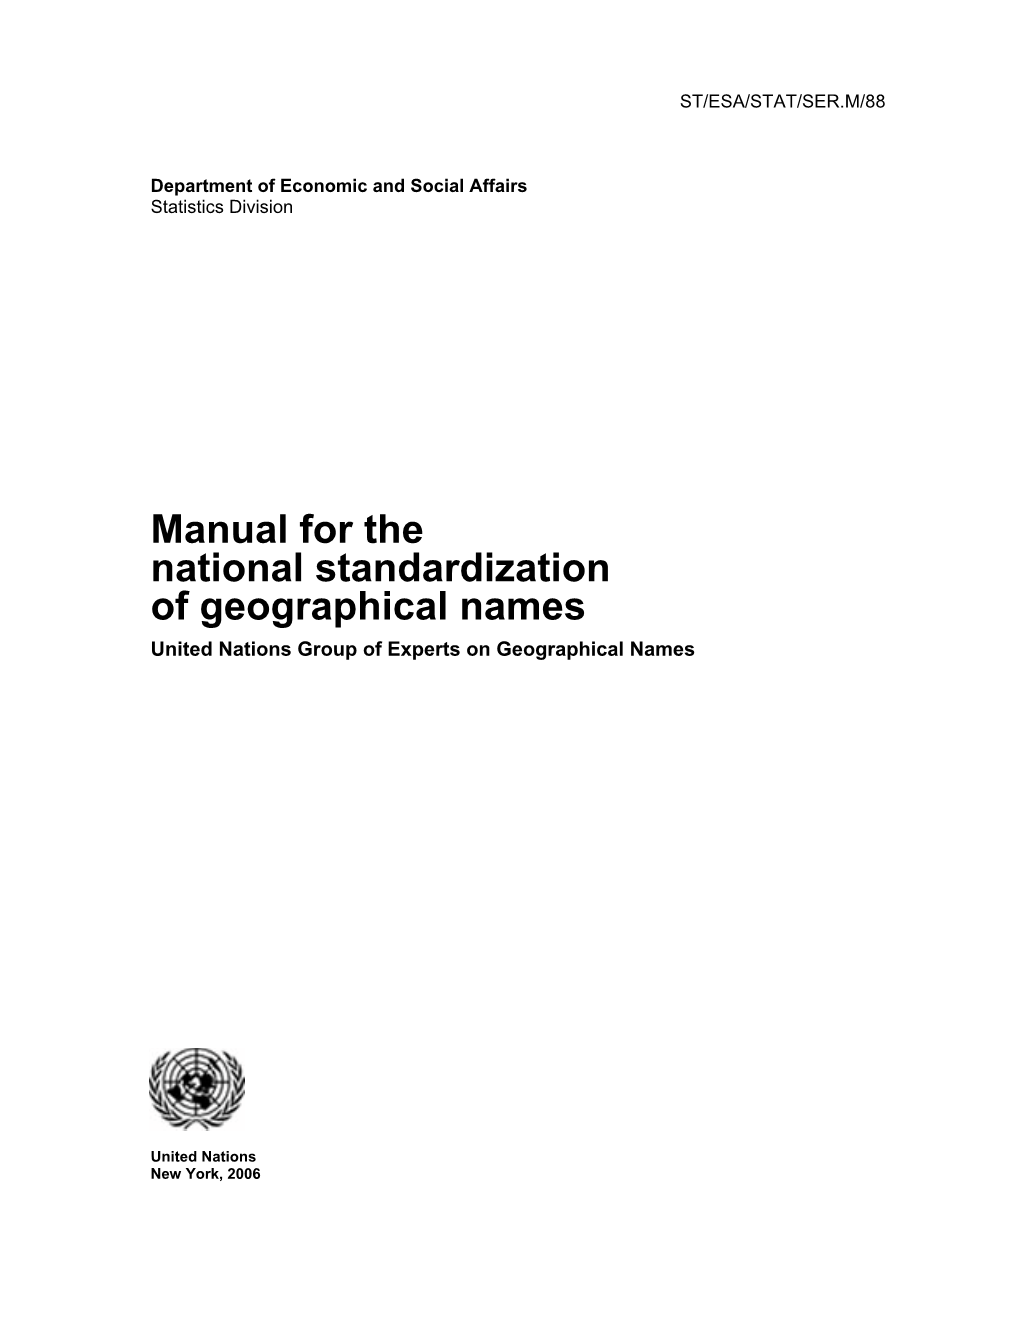 Manual for the National Standardization of Geographical Names United Nations Group of Experts on Geographical Names